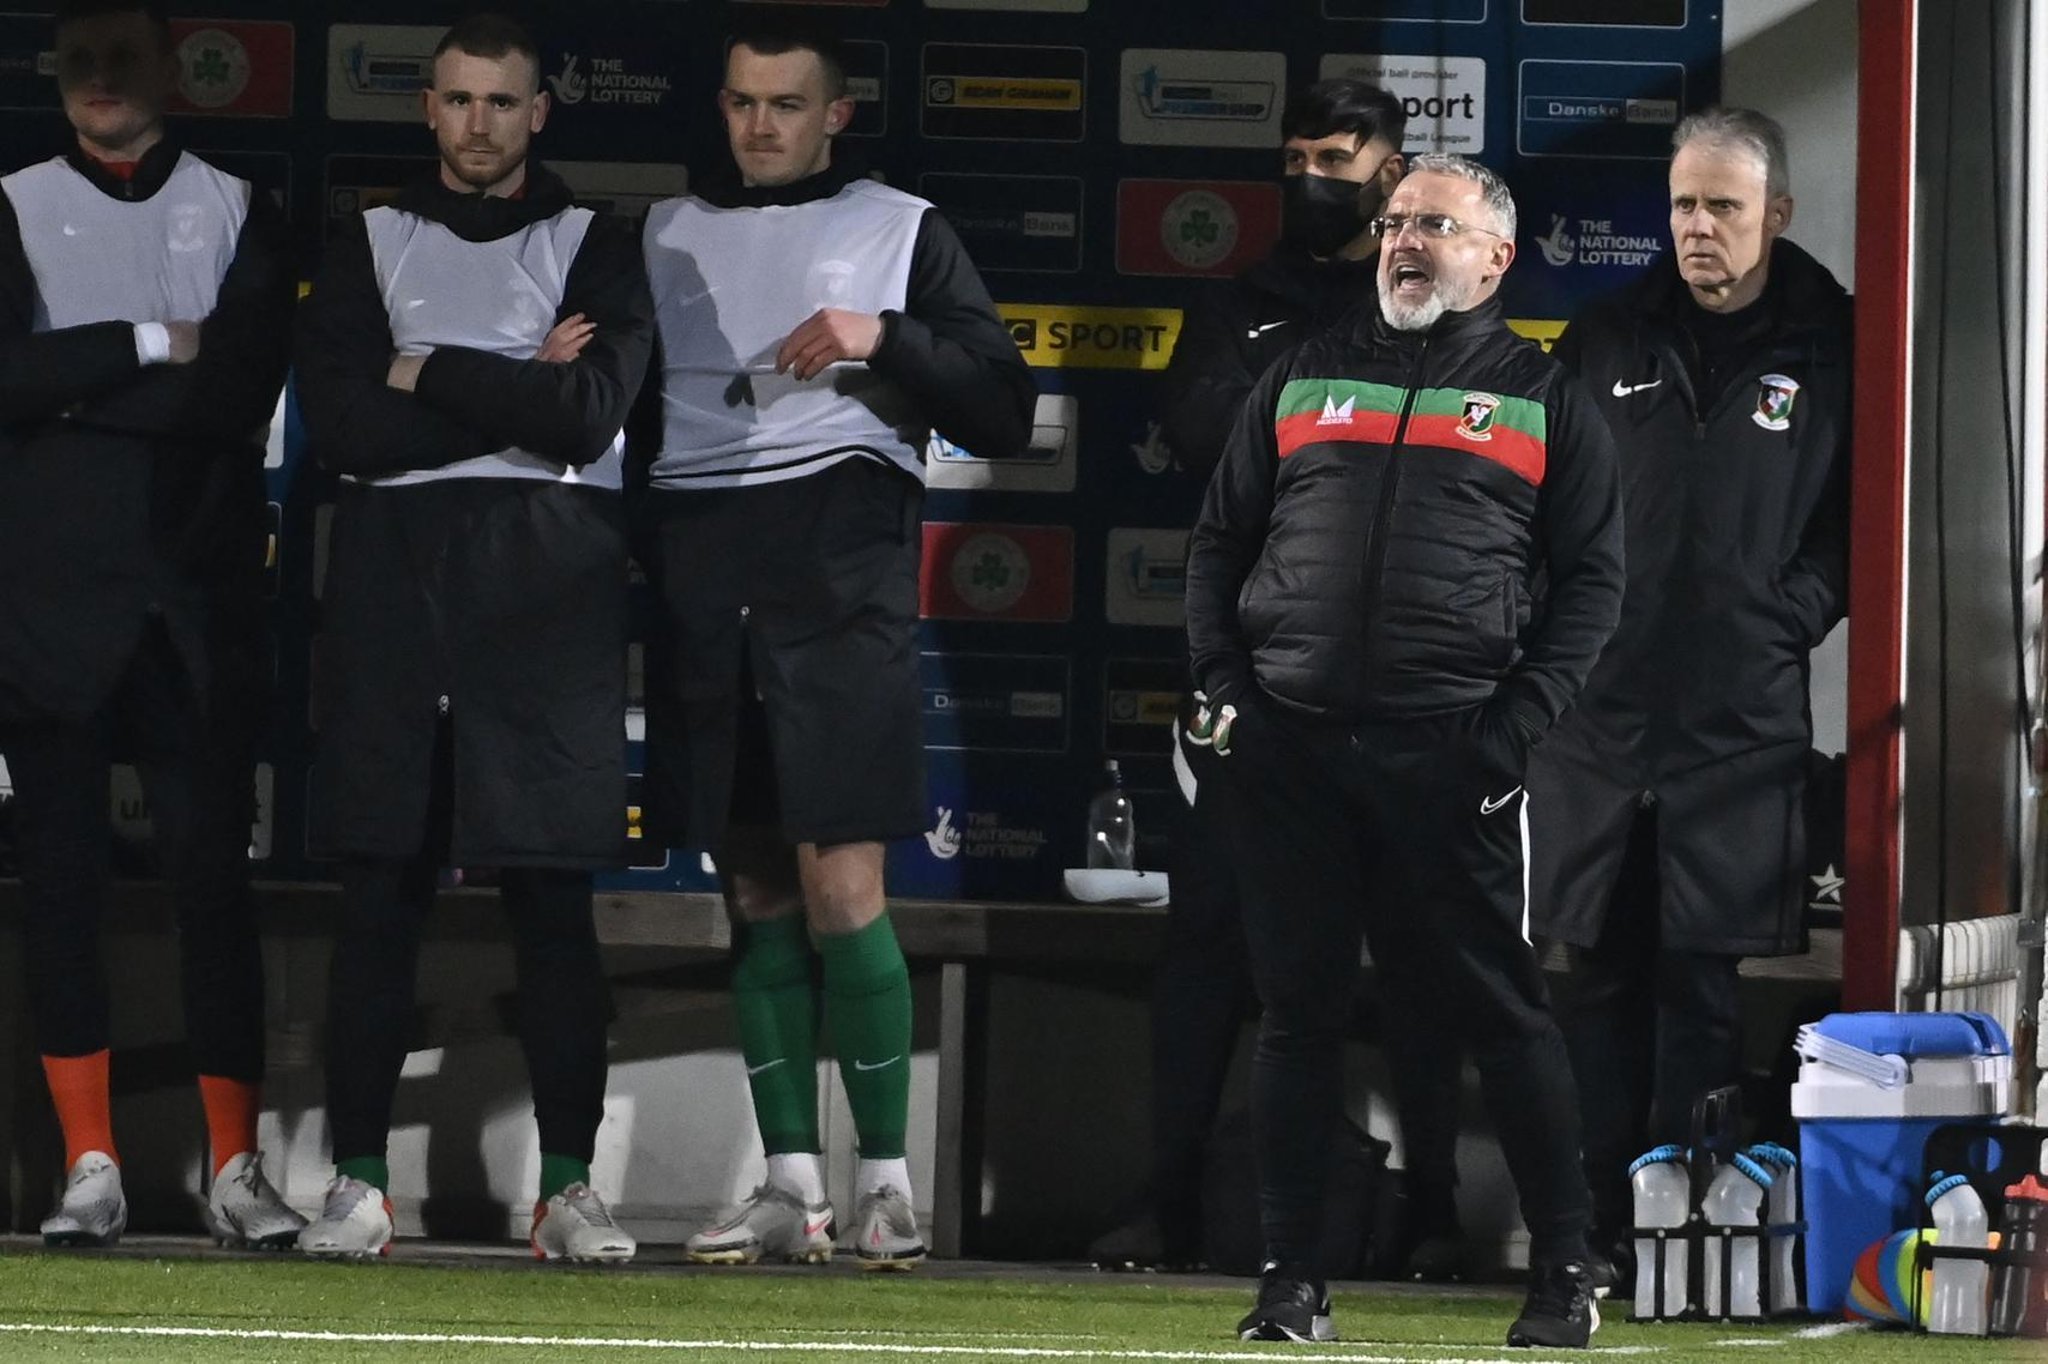 Tight title race brings pressure and motivation says Mick McDermott